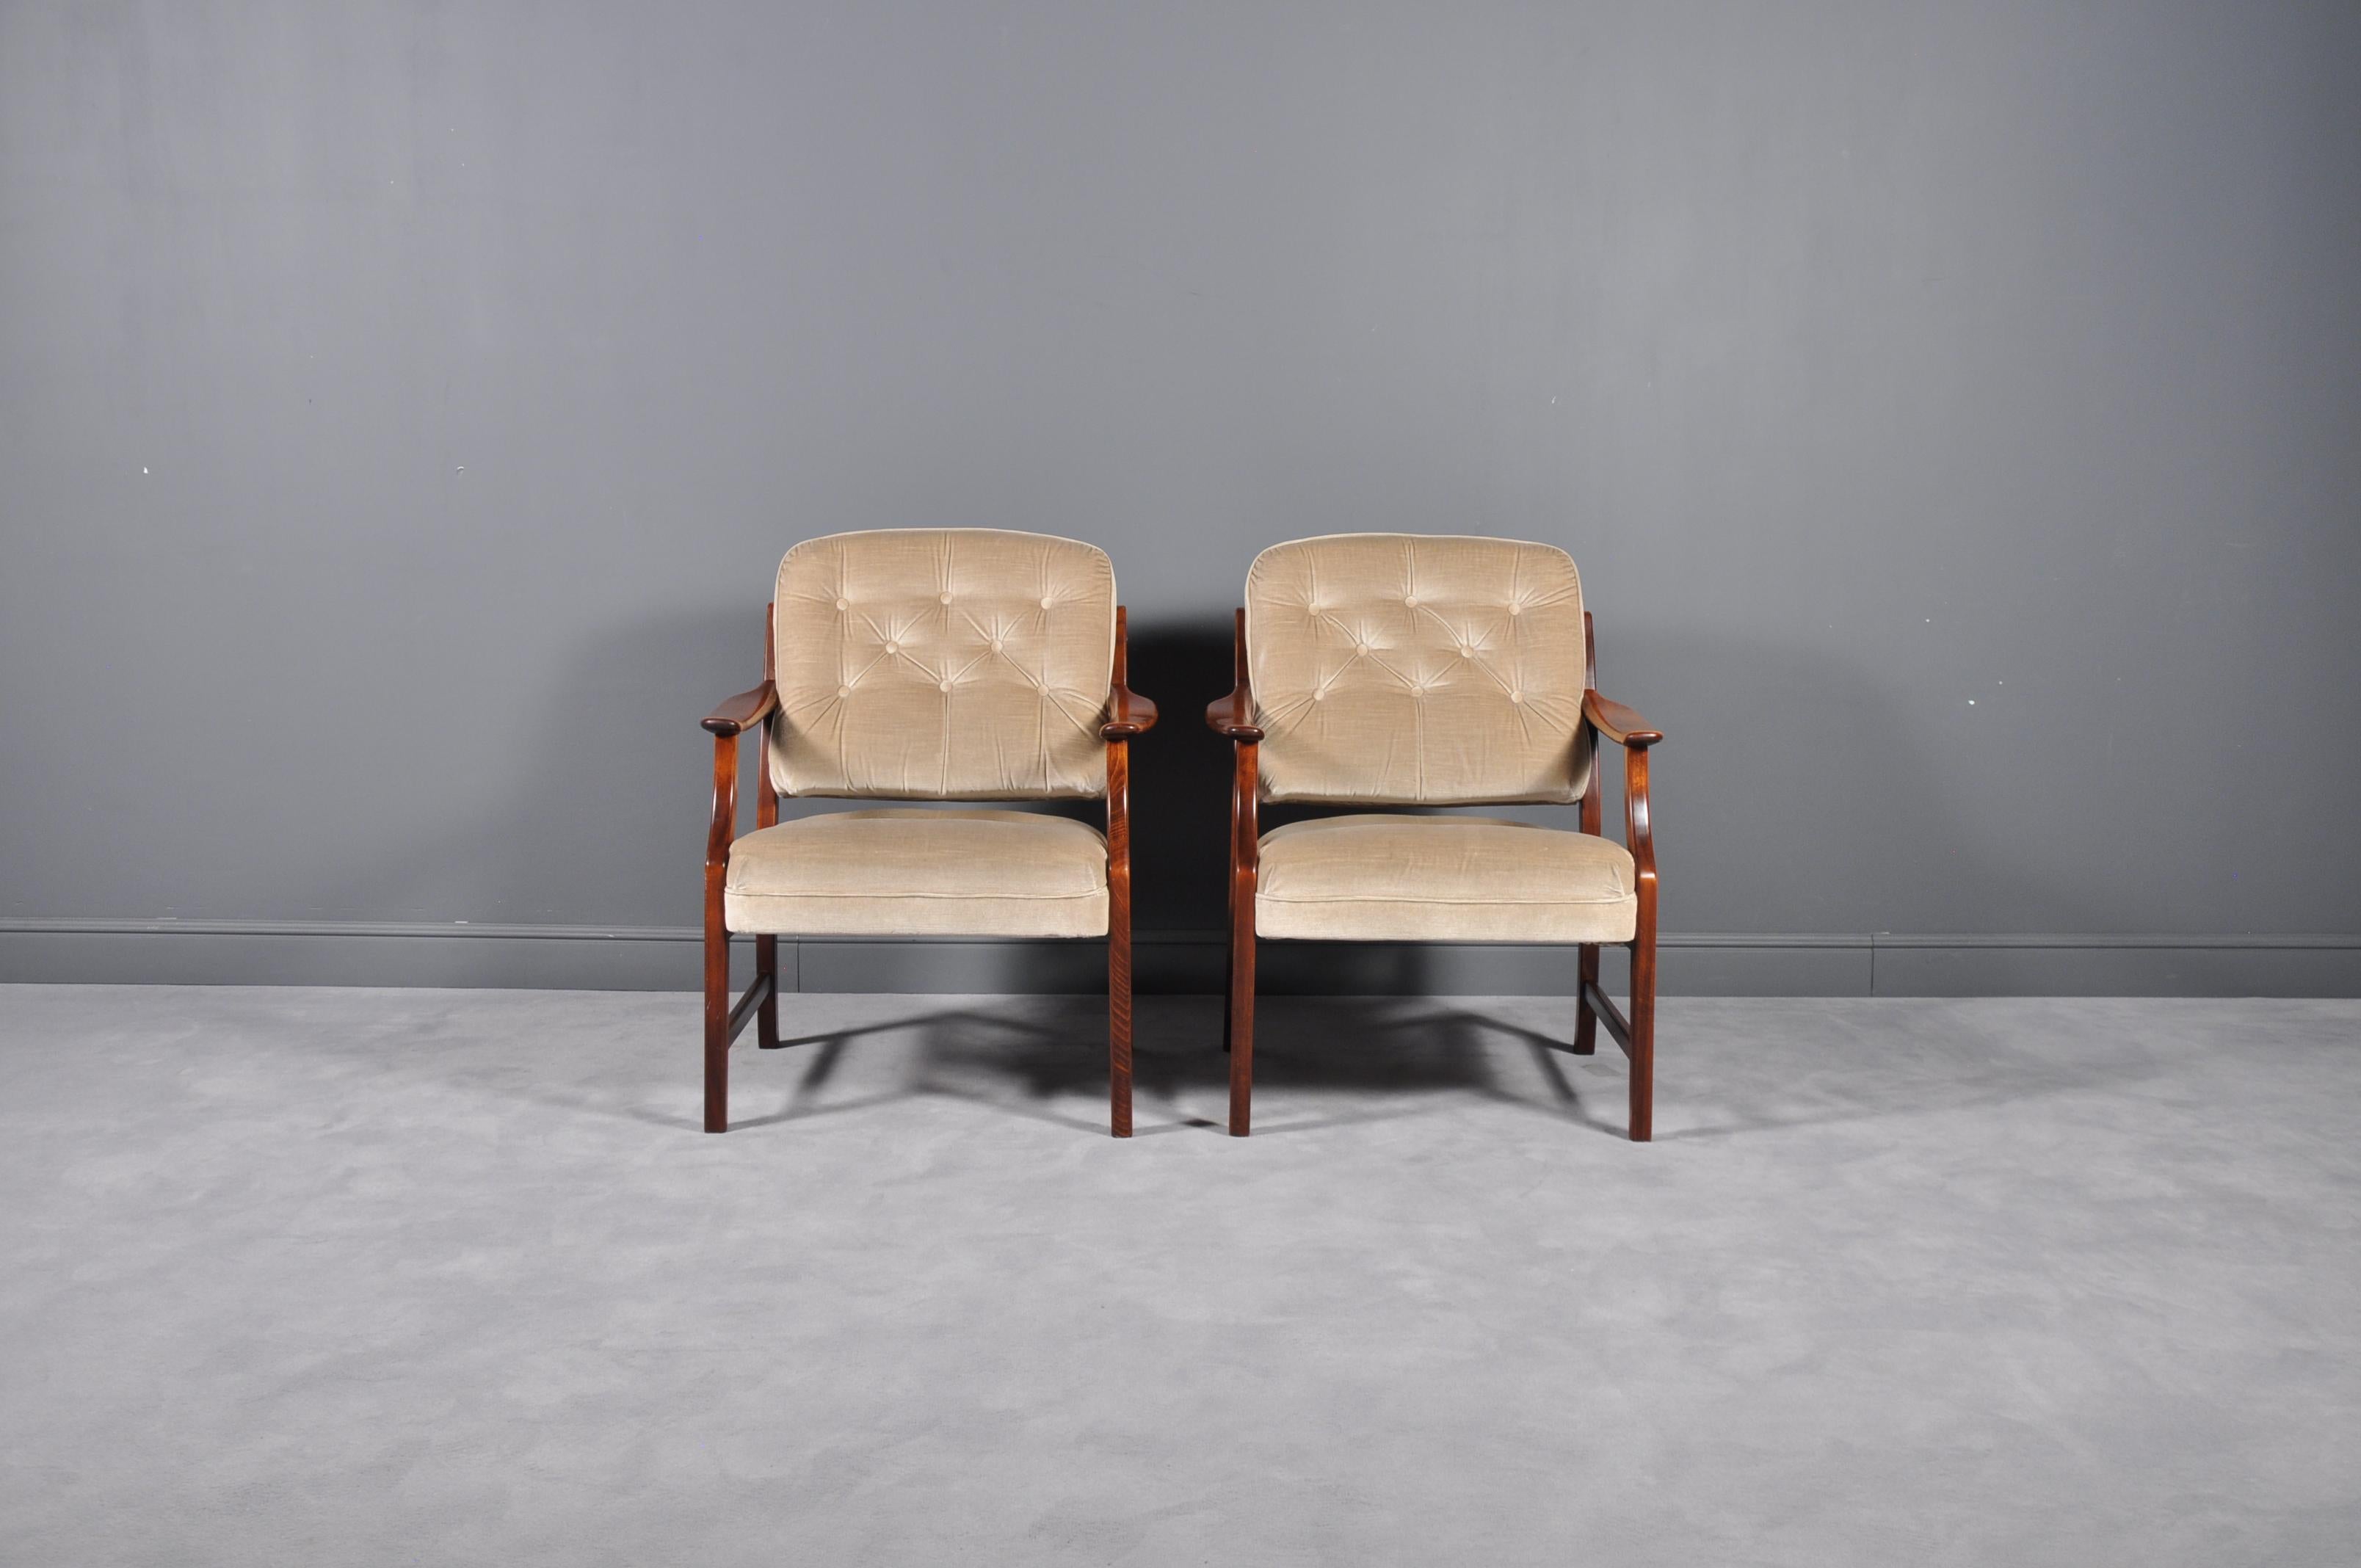 Fabric Pair of Two Danish Midcentury Modern Arm Dining Chairs, 1960s For Sale